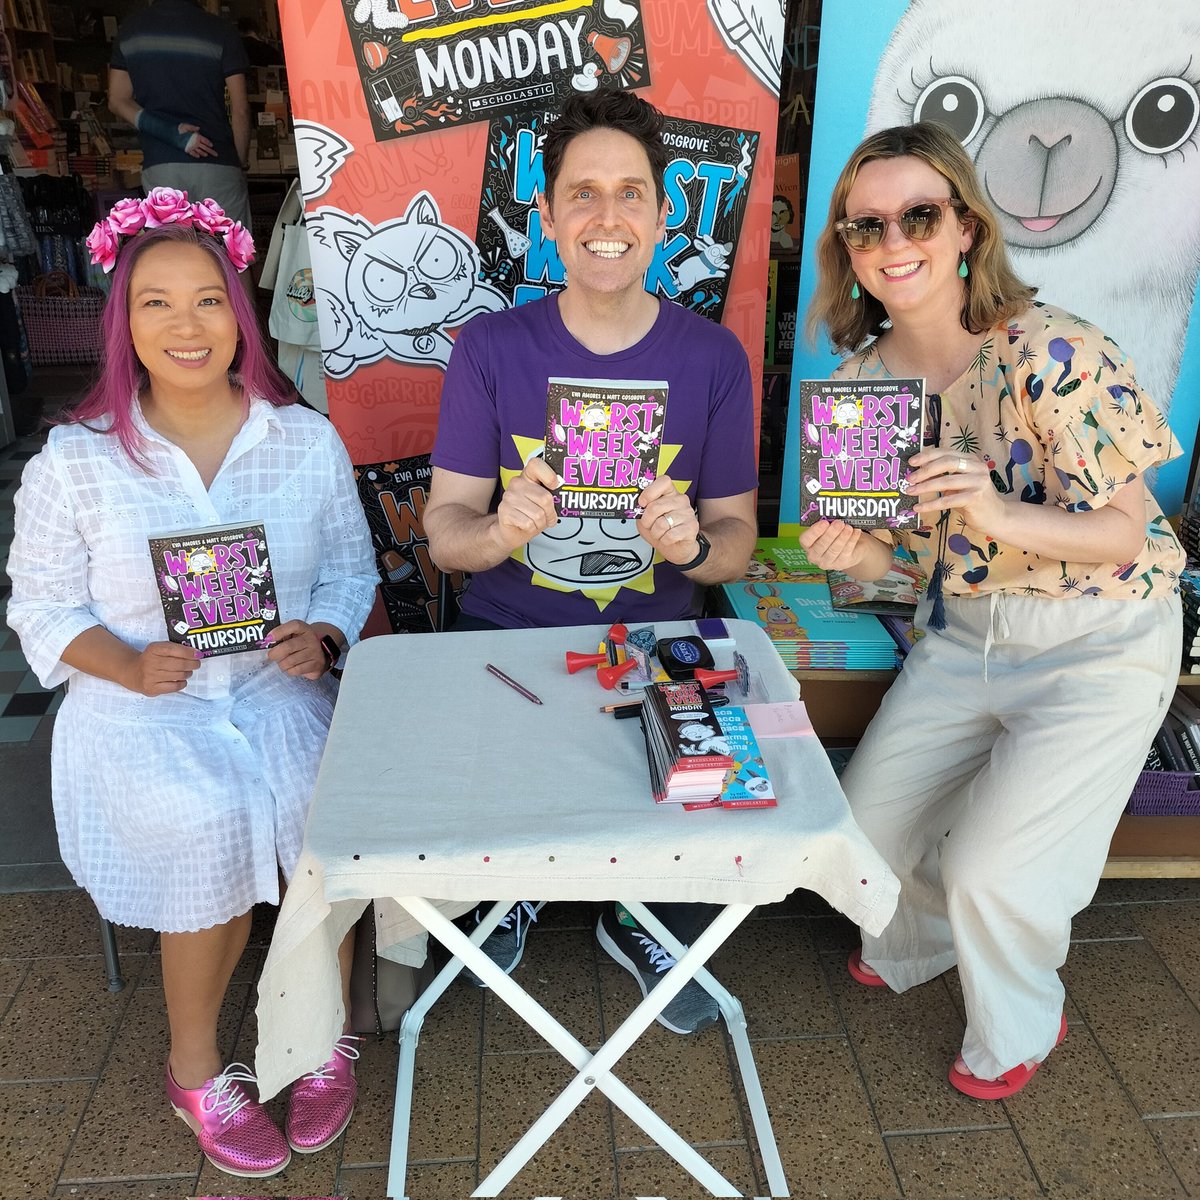 Look who I saw at the Dulwich Hill festival today - picked up the latest installment of Worst Week Ever too! 💜 @EvaJanetAmores @MrMattCosgrove #loveozkidlit